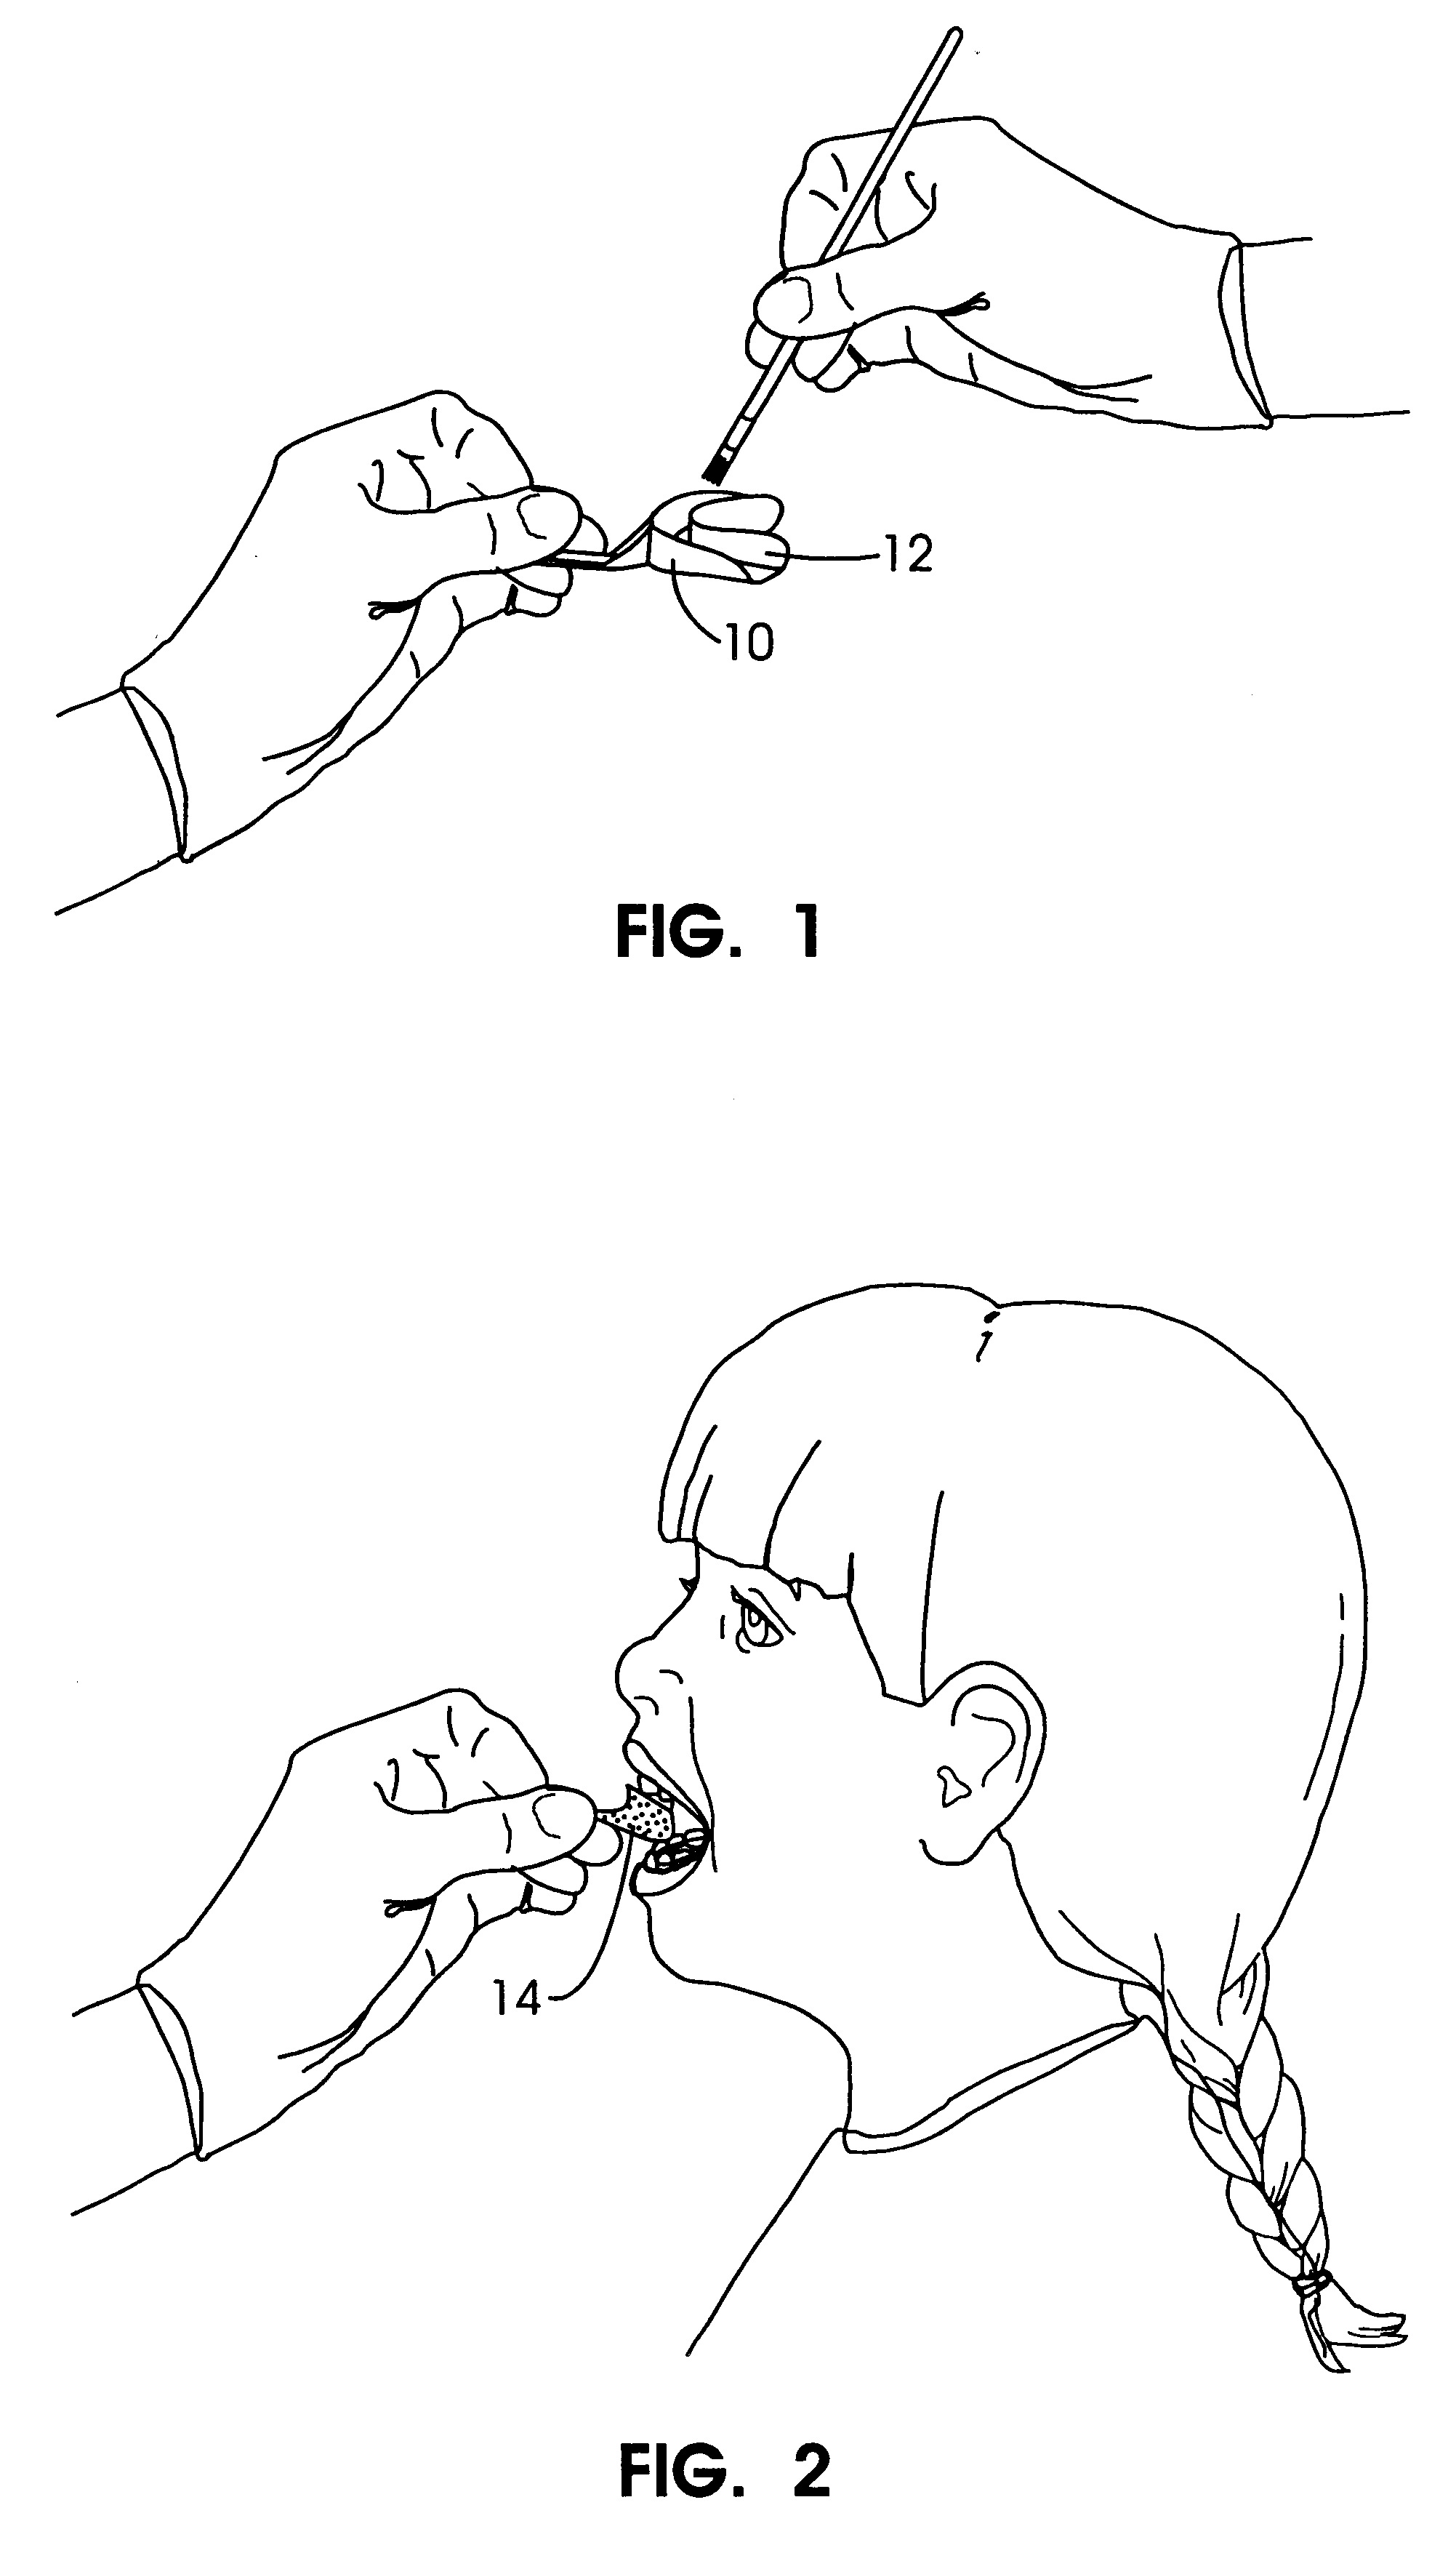 Apparatus and methods for accelerating dental treatments